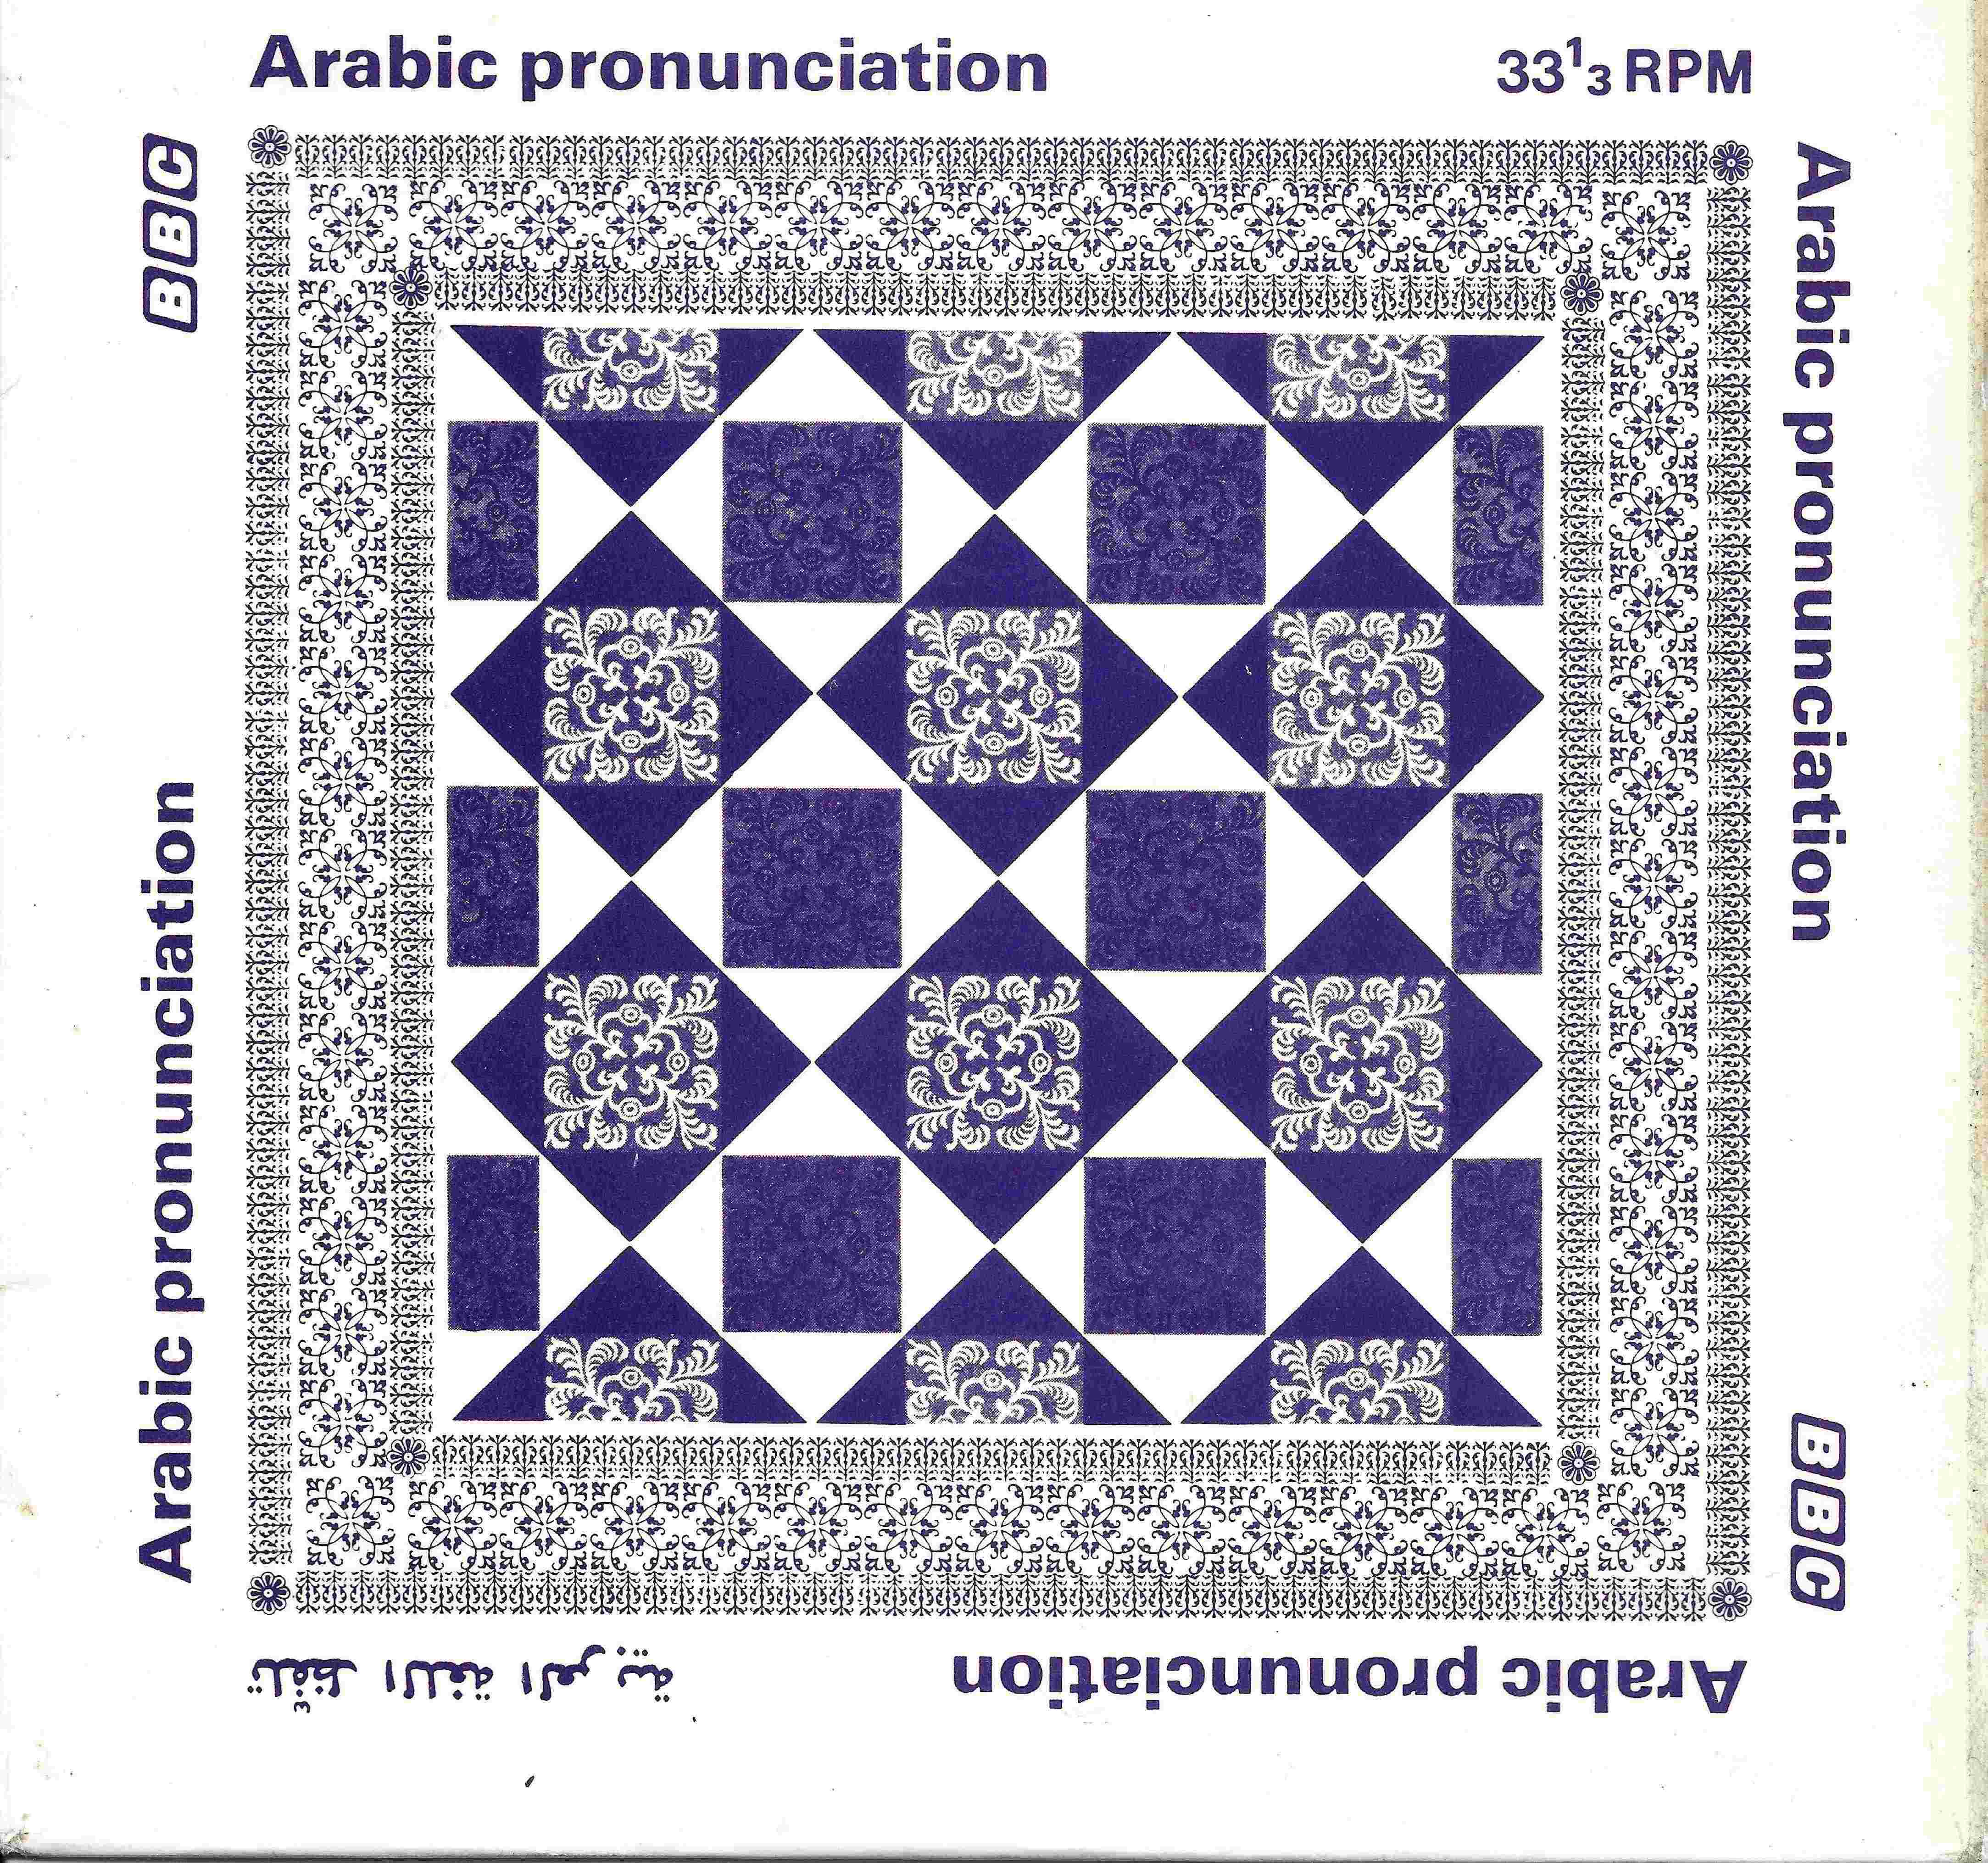 Picture of OP 171 Arabic pronunciation by artist T. F. Mitchell from the BBC records and Tapes library